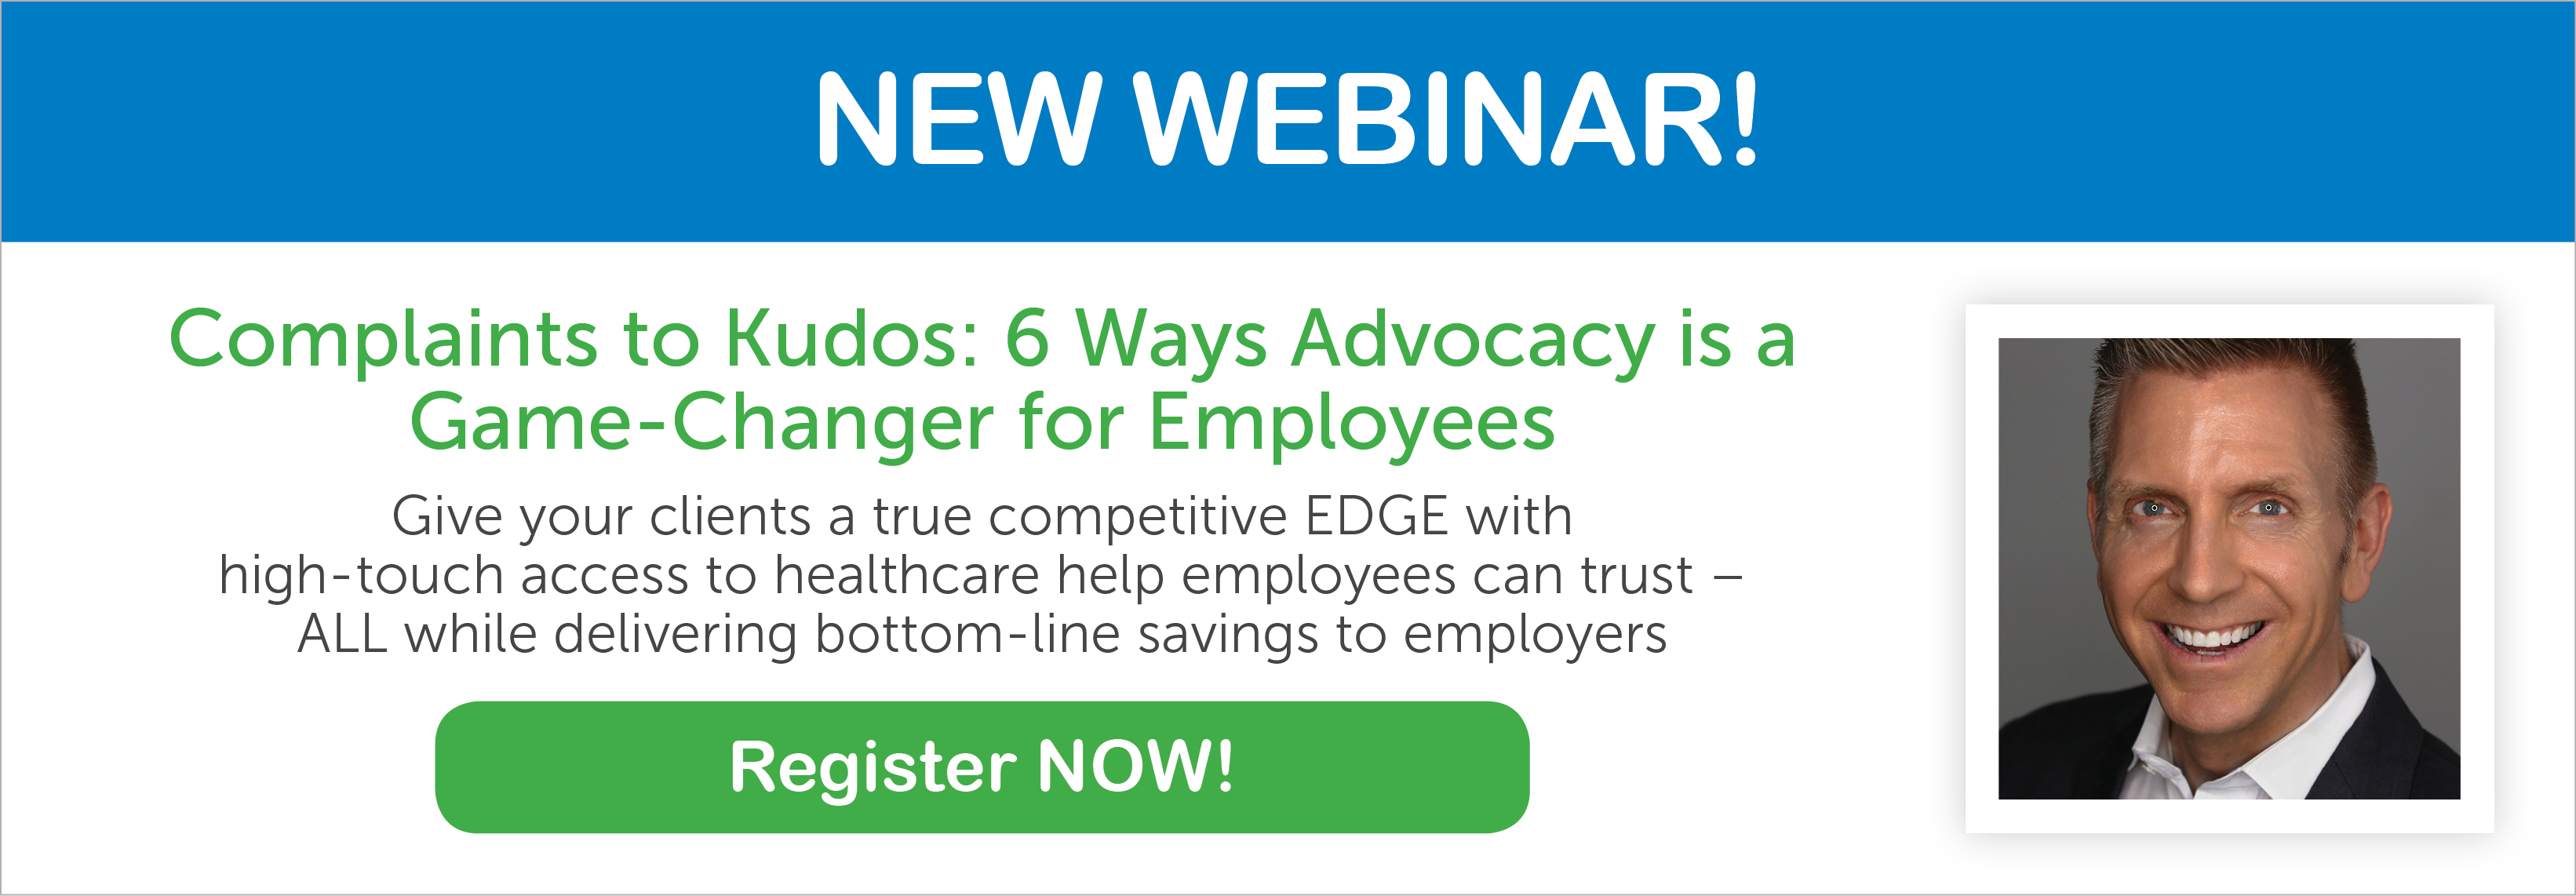 Complaints to Kudos: 6 Ways Advocacy is a Game-Changer